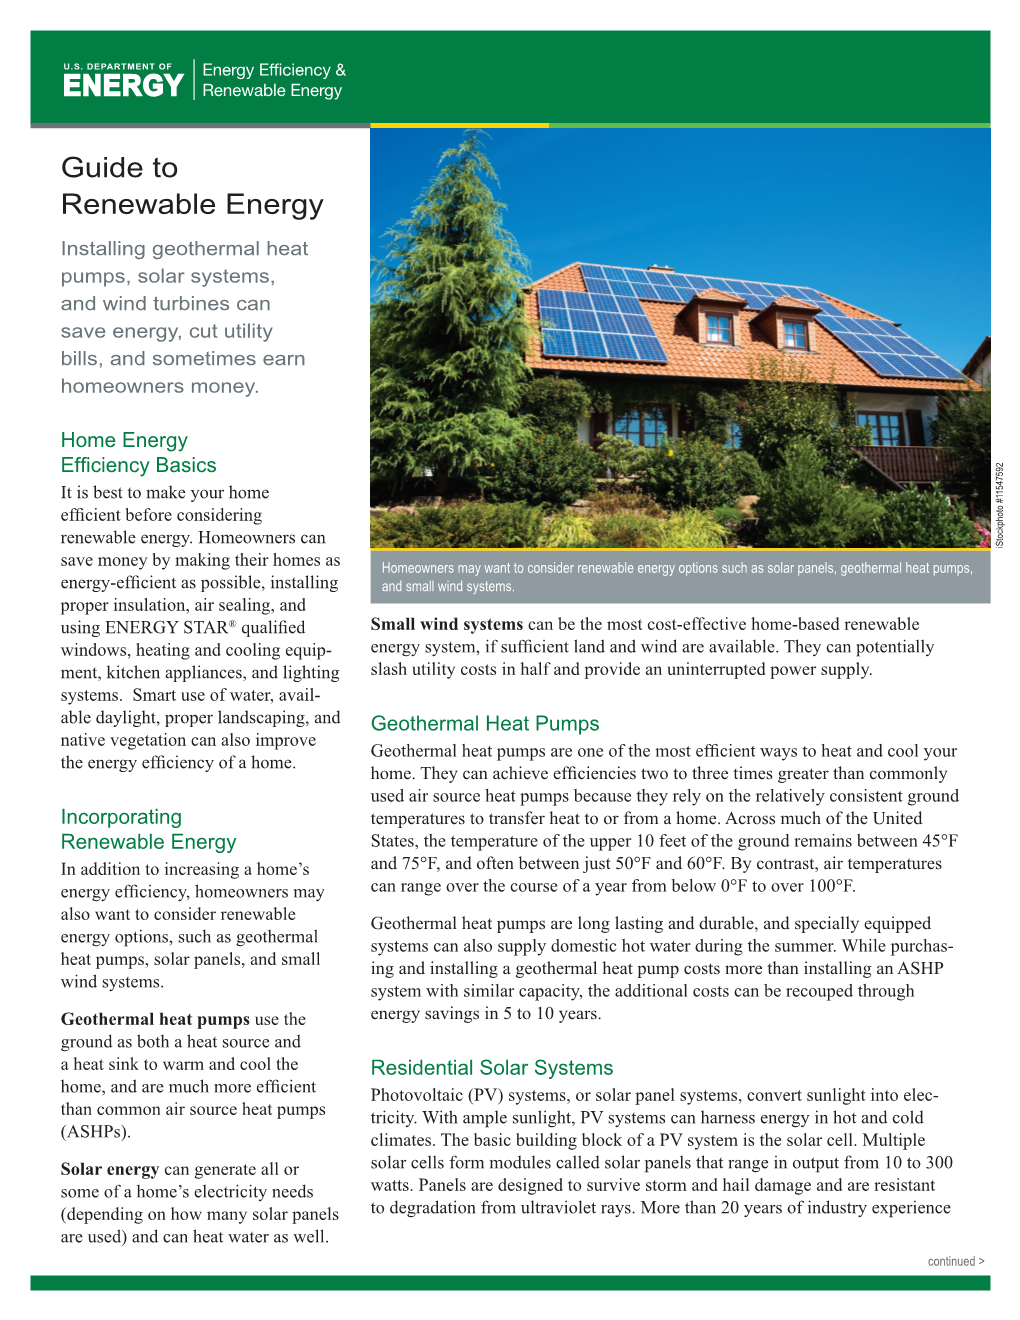 Guide to Renewable Energy Installing Geothermal Heat Pumps, Solar Systems, and Wind Turbines Can Save Energy, Cut Utility Bills, and Sometimes Earn Homeowners Money